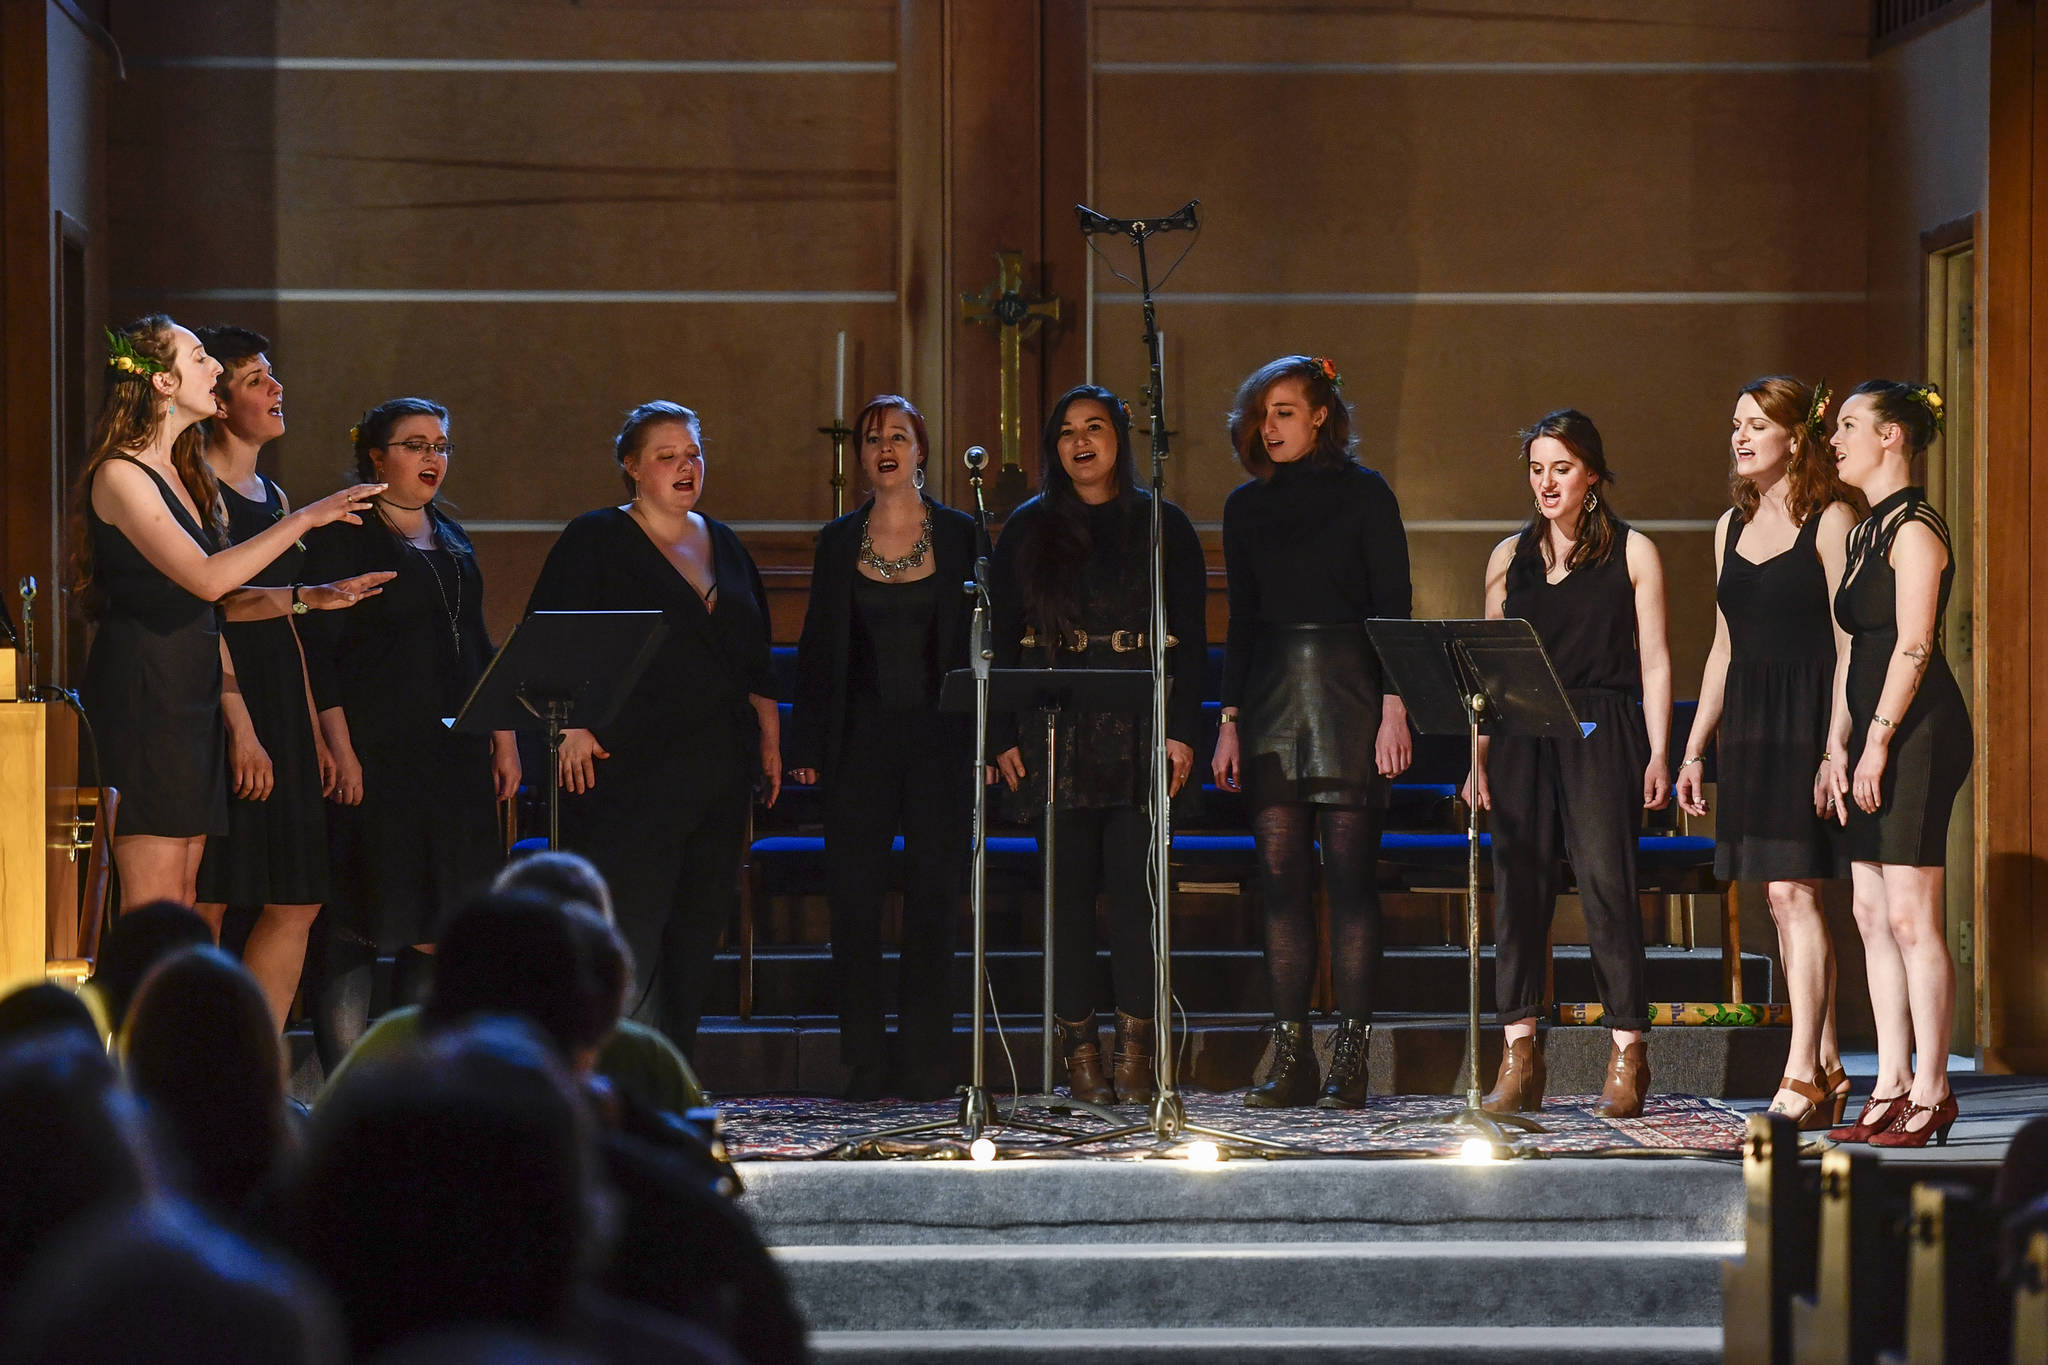 Queens, of Juneau, Alaska, perform a concert titled “A Night of Queens” at the Northern Light United Church on Thursday, April 11, 2019. Not in order, Queens is made up of Taylor Vidic, Elizabeth Ekins, Cate Ross, Asia Ver, Andria Budbill, Rashah McChesney, Zoe Grueskin, Marian Call, Wendy Byrnes and Jess Skiba. (Michael Penn | Juneau Empire)